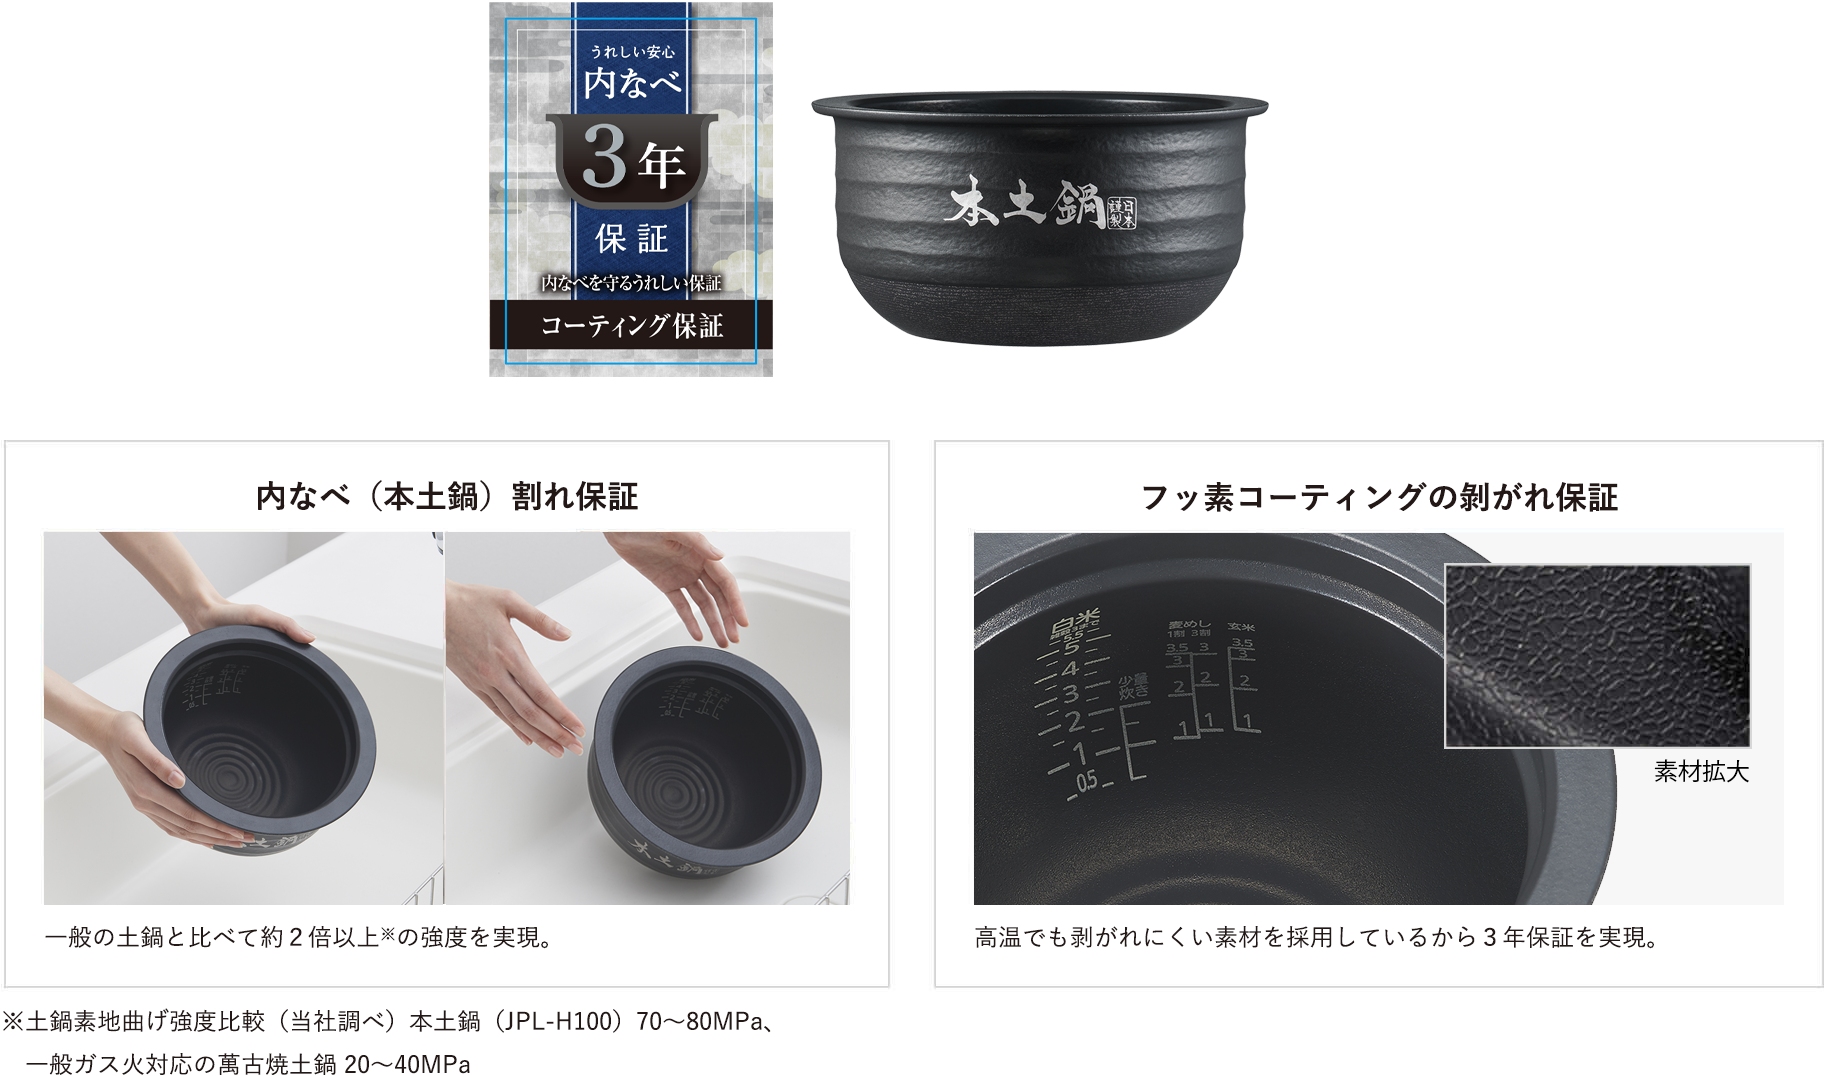 Two types of warranties to protect the inner pot (authentic donabe). Introduction image